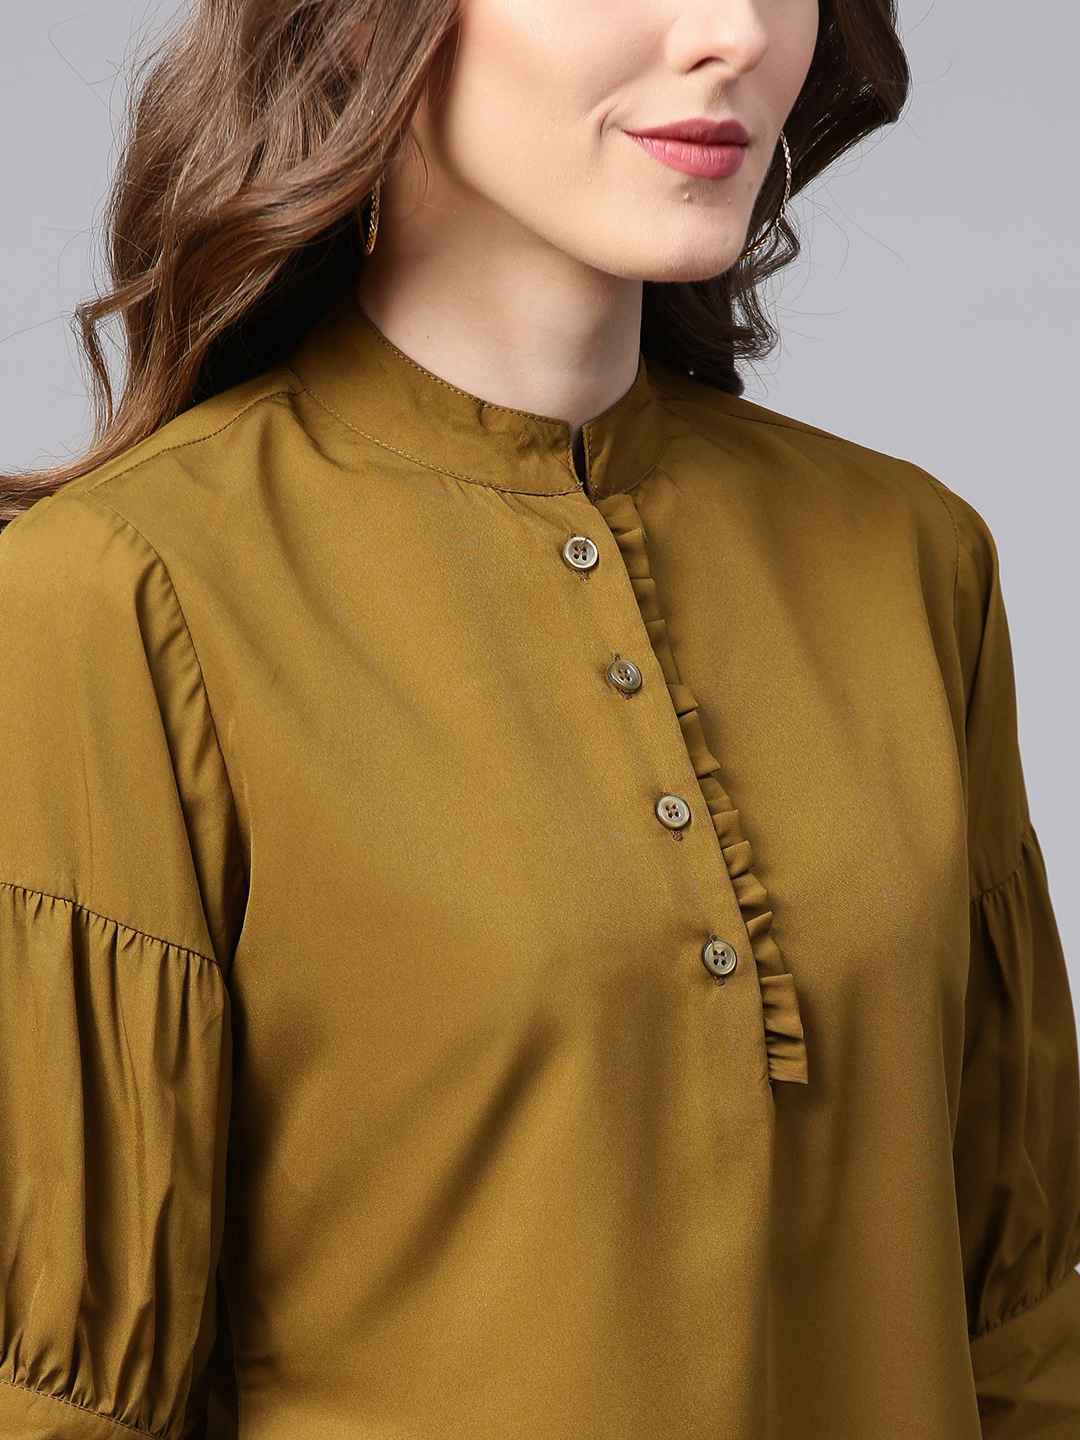 Ives-Women-Olive-Green-Solid-Shirt-Style-Top